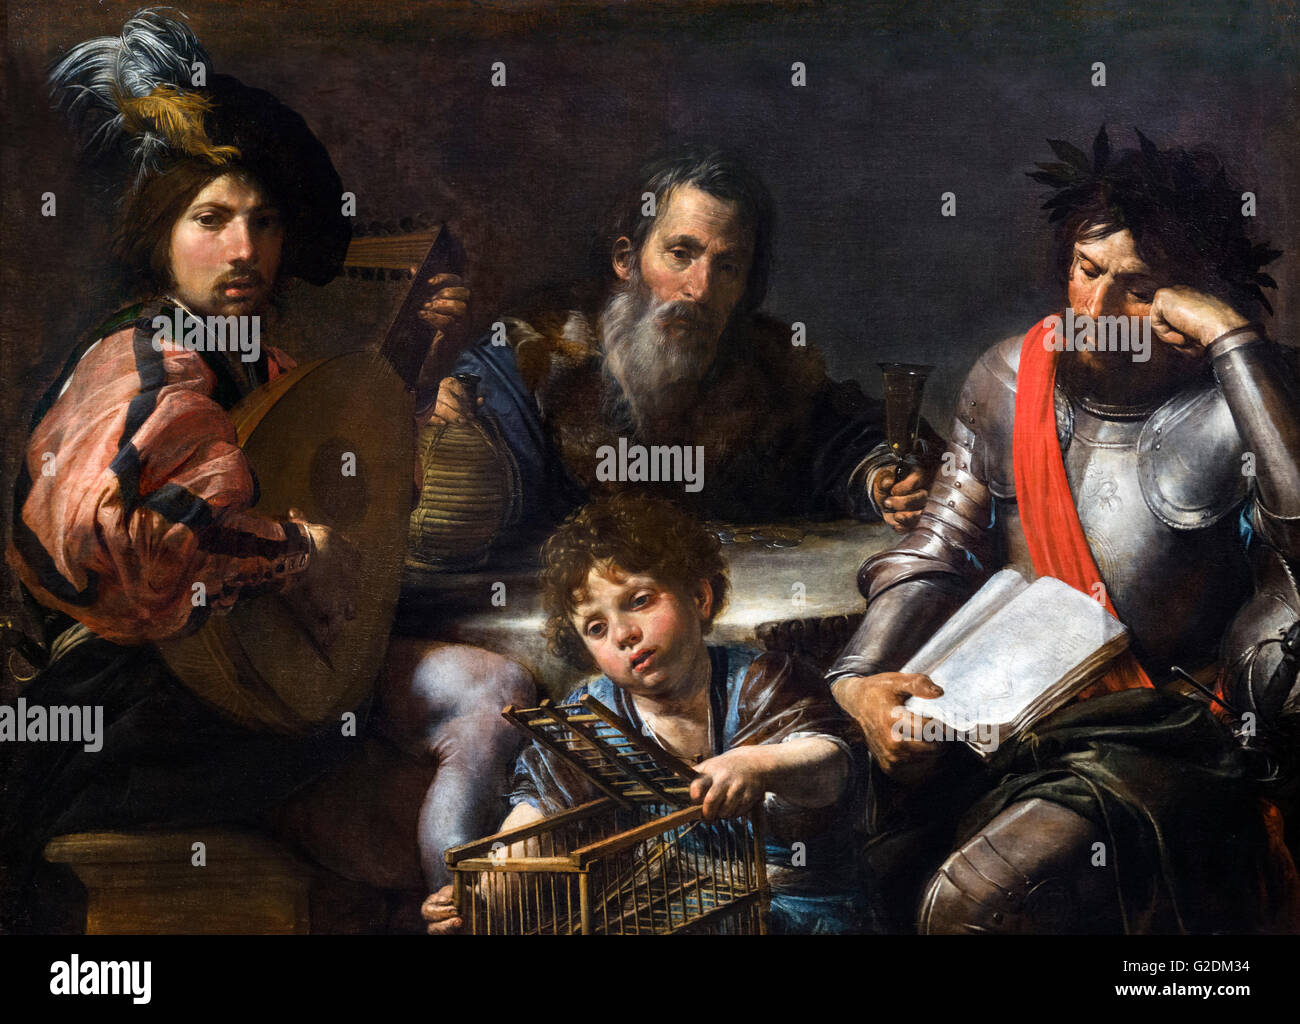 The Four Ages of Man by Valentin de Boulogne, oil on canvas, c.1629. The painting depicts four stages of life life: Infancy (centre foreground); Youth (left); Manhood (right) and Age (centre background). Stock Photo